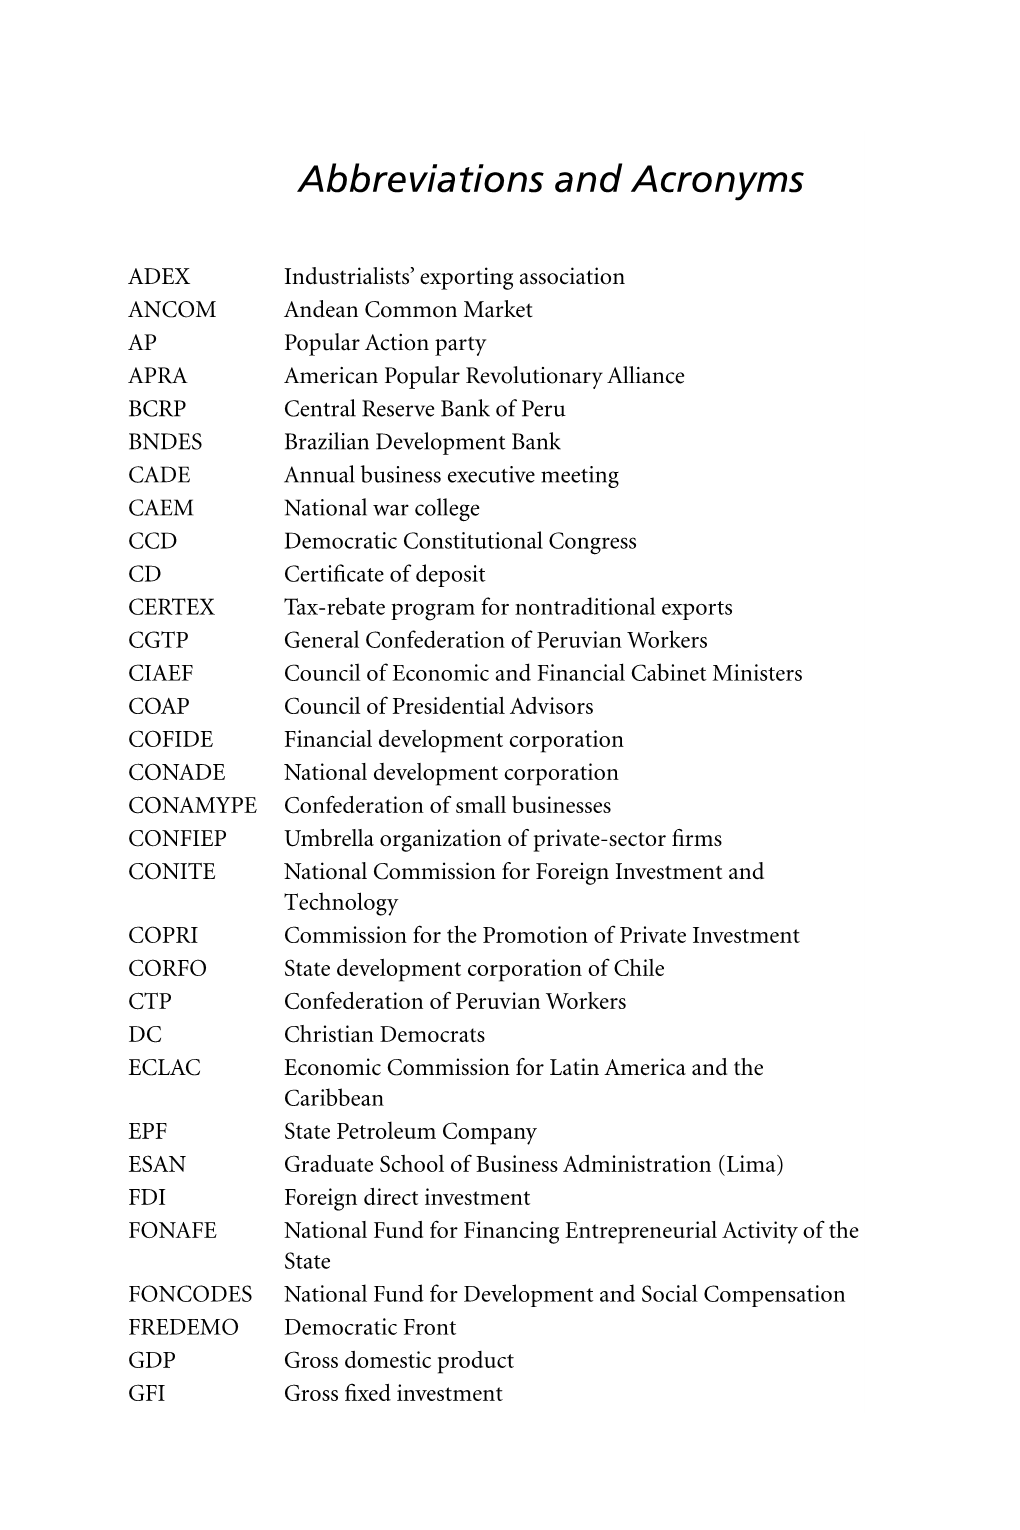 Abbreviations and Acronyms